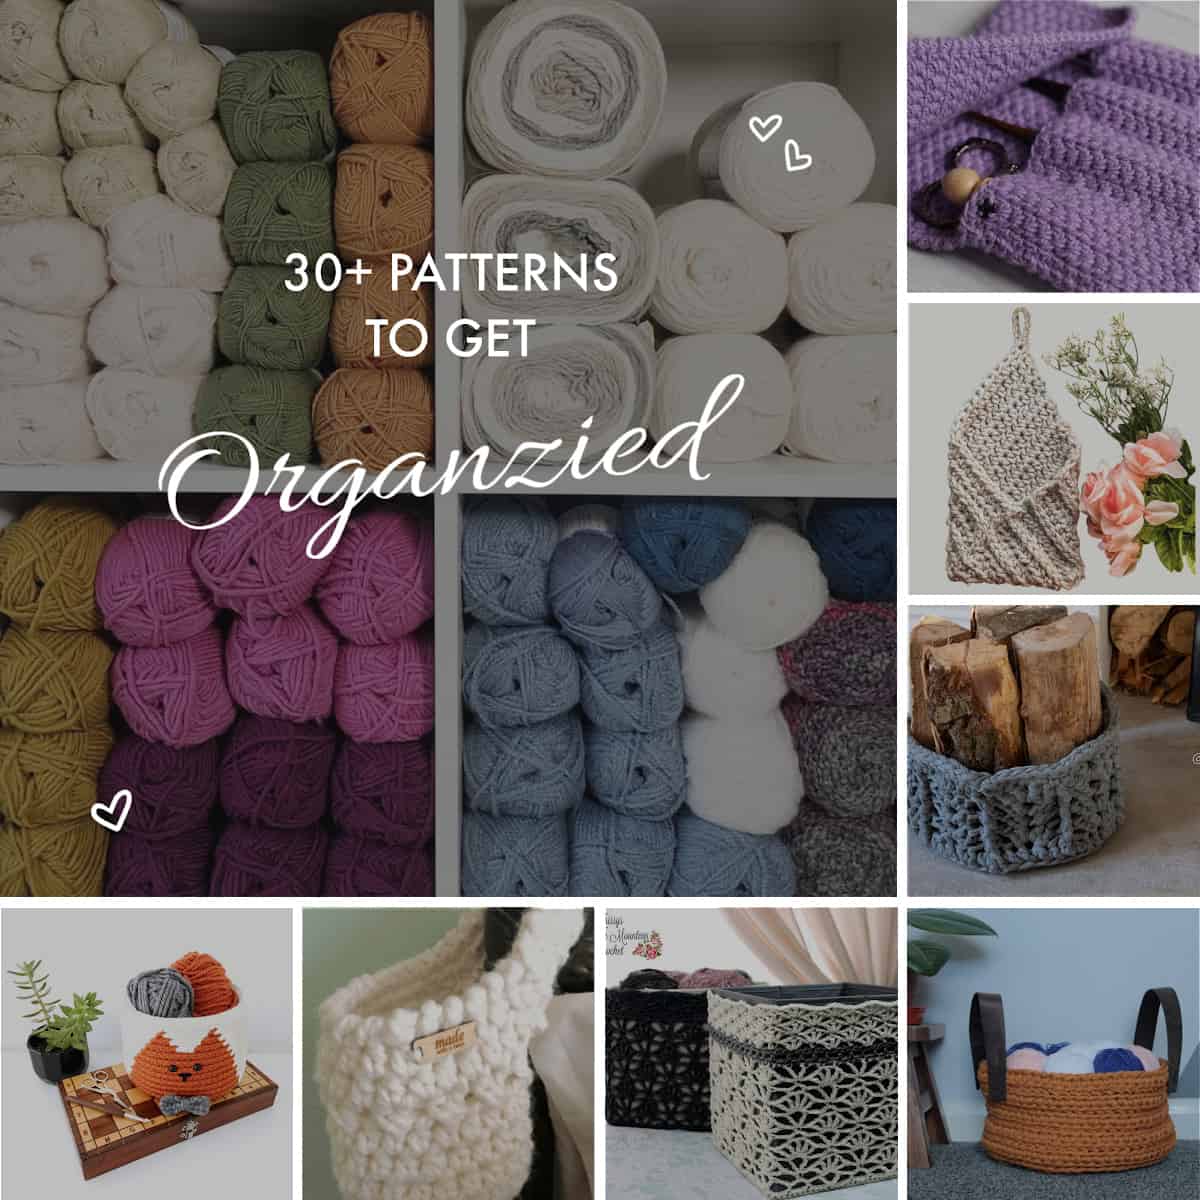 30+ Crochet Patterns to Get Organized in the New Year